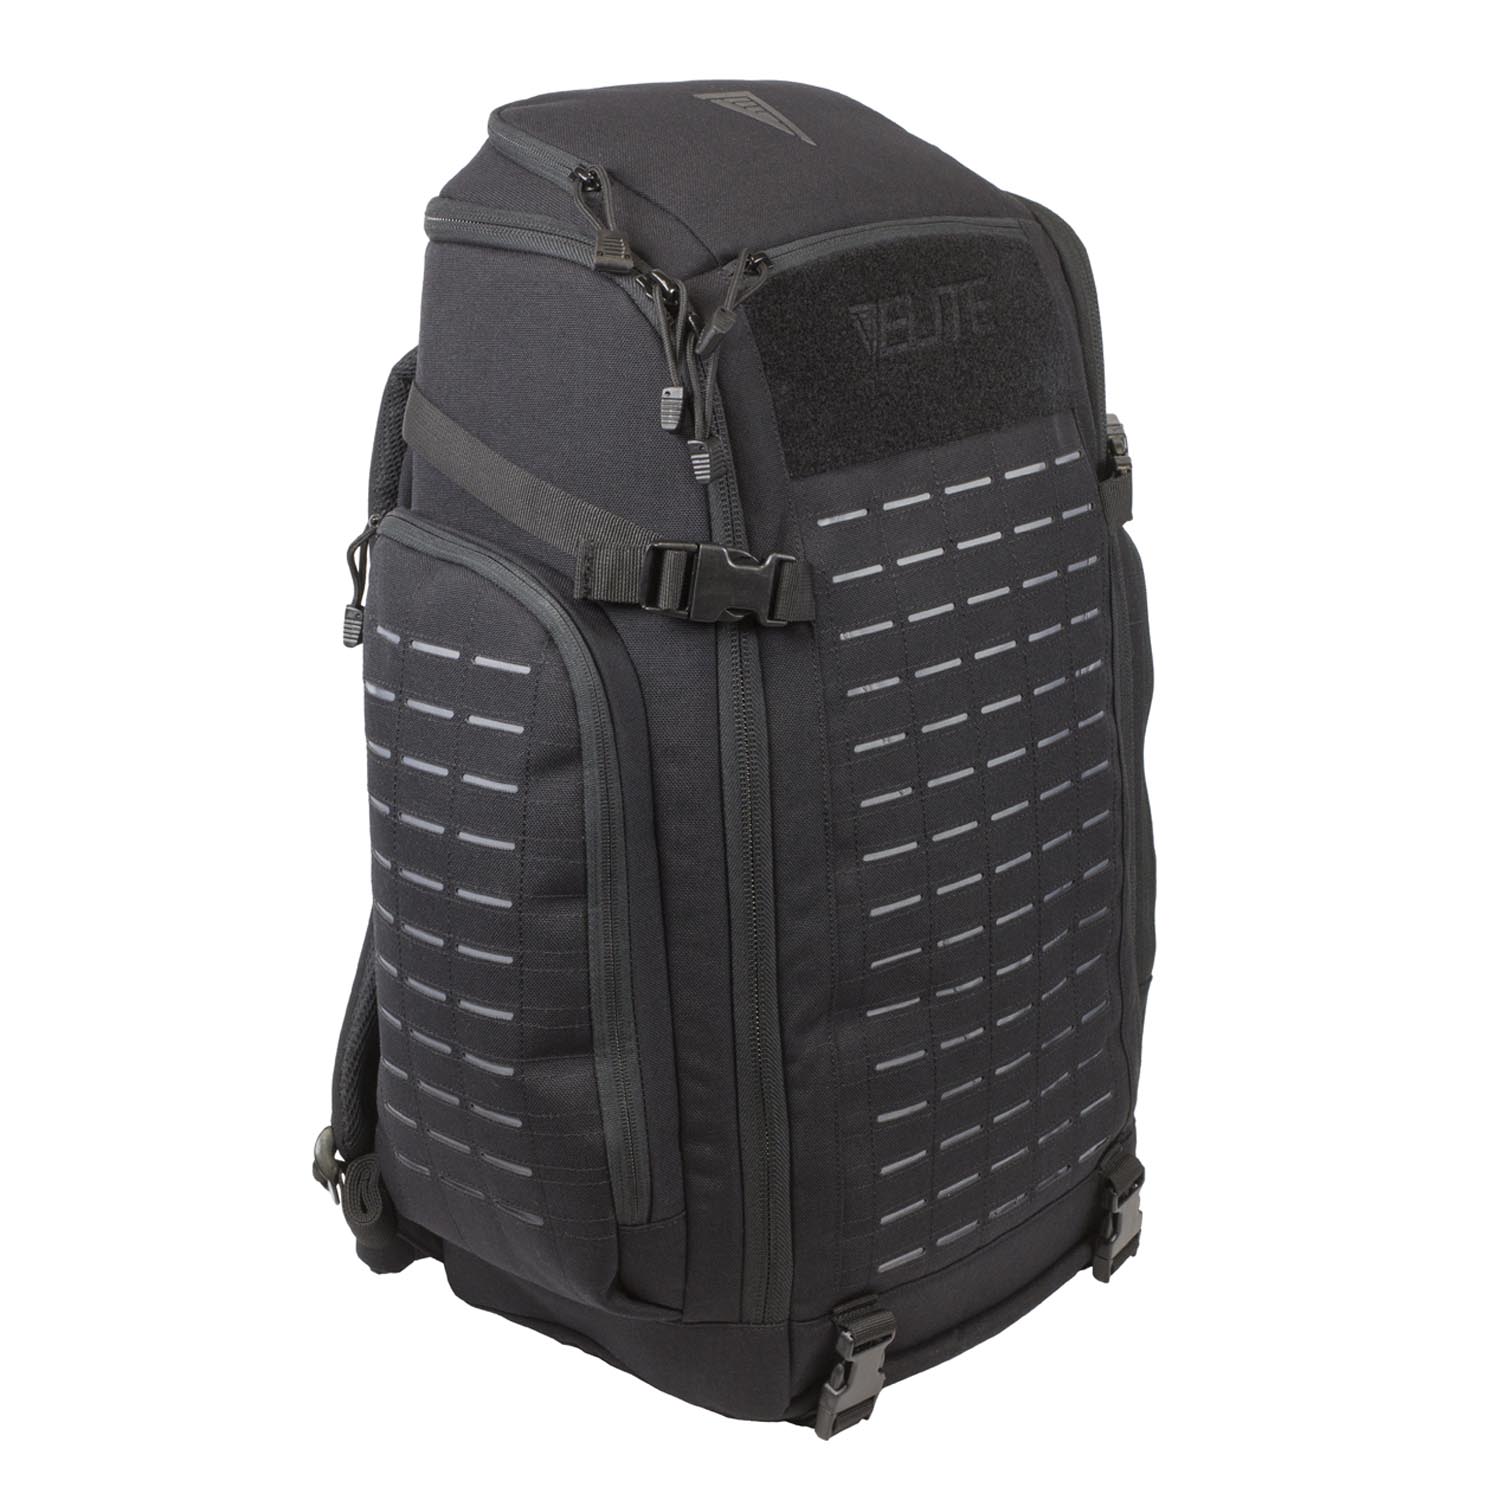 TENACITY-72 3 DAY SUPPORT/SPECIALIZATION BACKPACK 42L